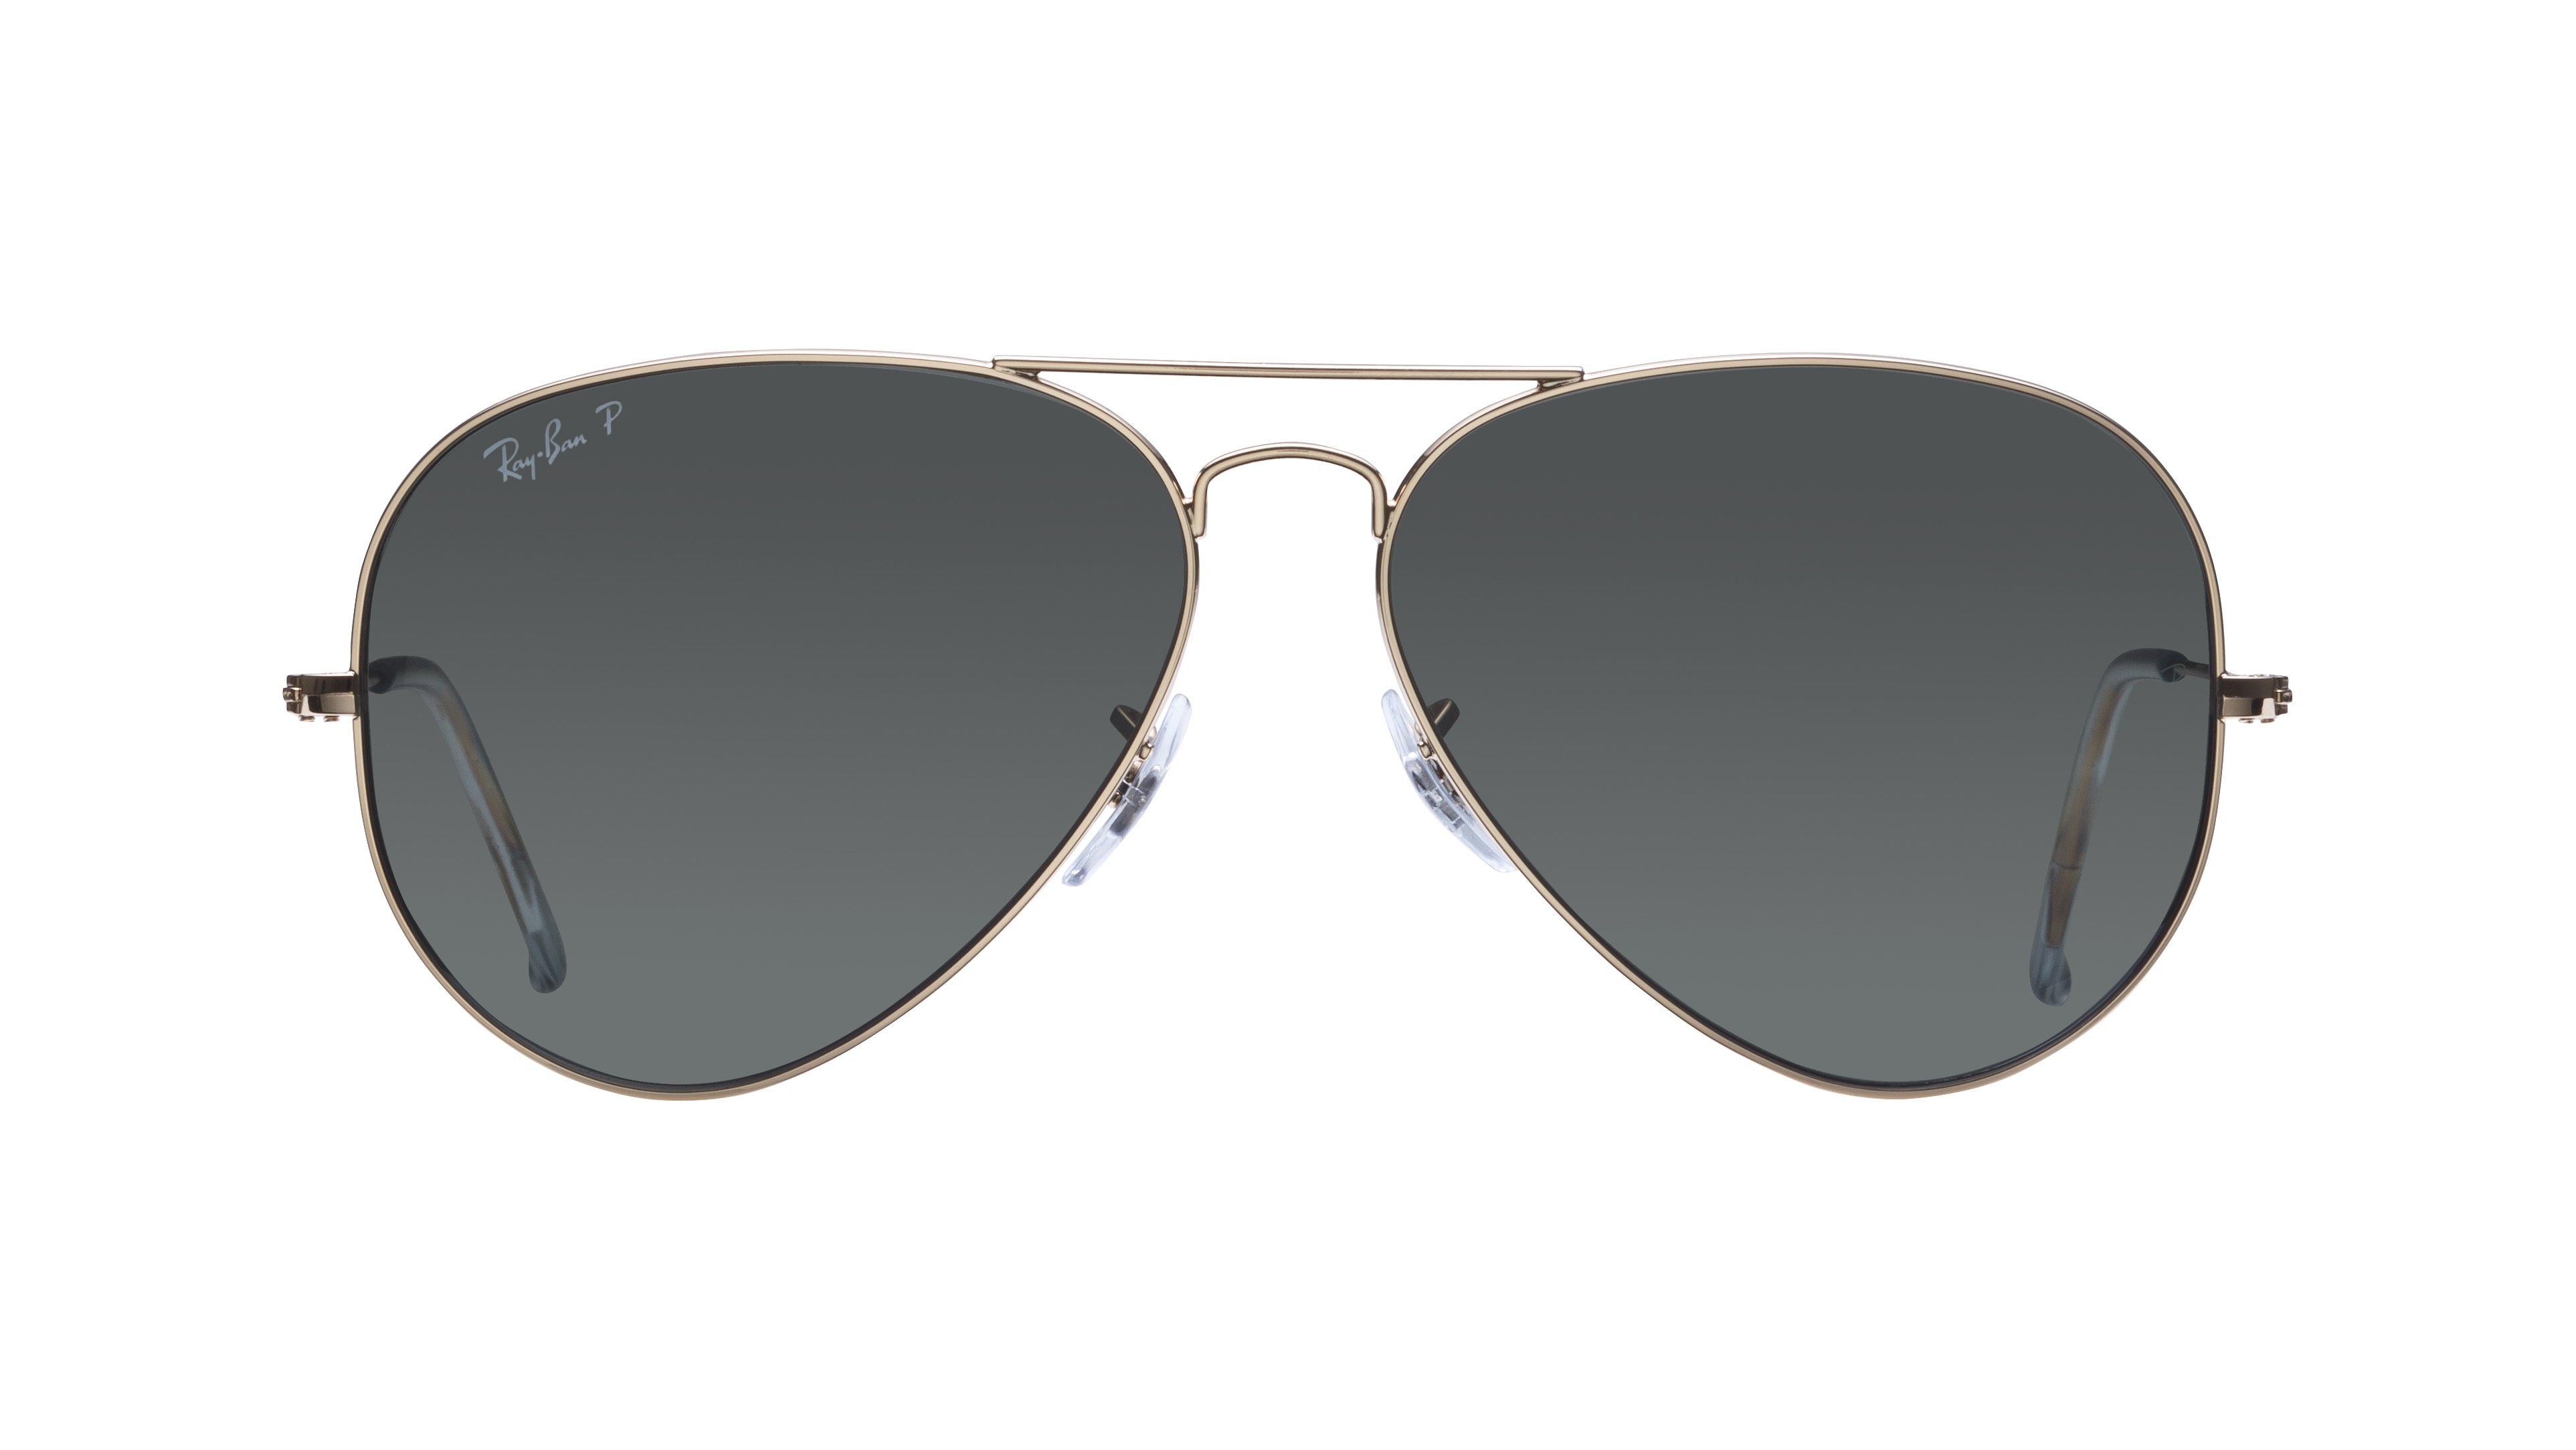 [products.image.front] Ray-Ban AVIATOR LARGE METAL 0RB3025 001/58 Sonnenbrille